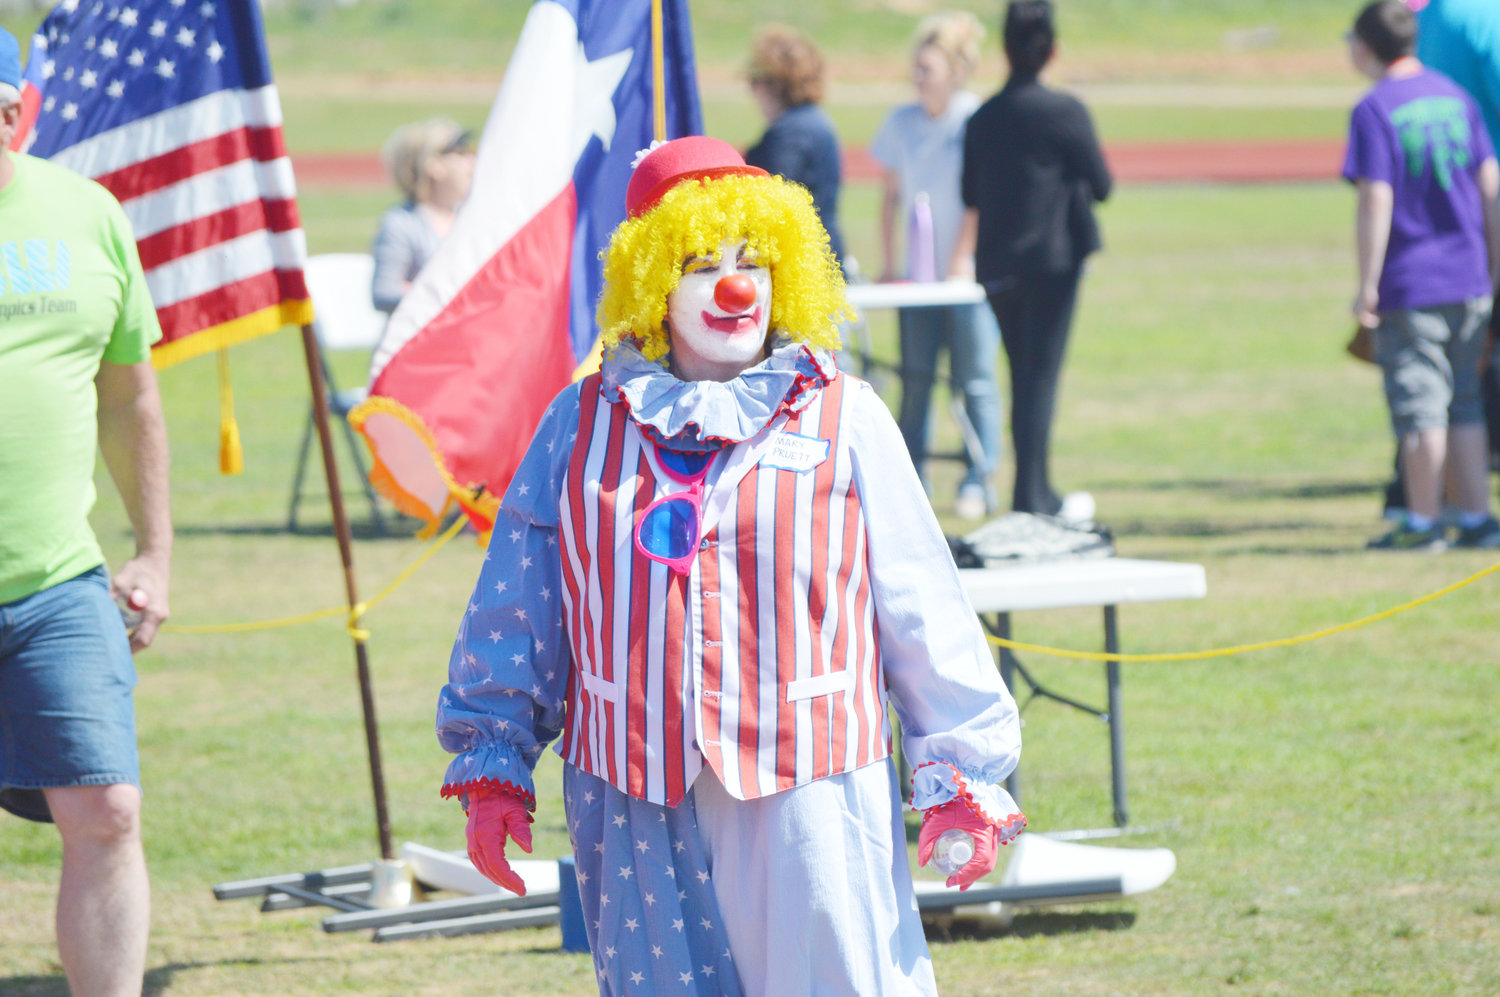 Plenty of smiles and laughs were handed out by some very busy clowns (Mary Pruett) at the Quitman Pilot Club Special Olympics.